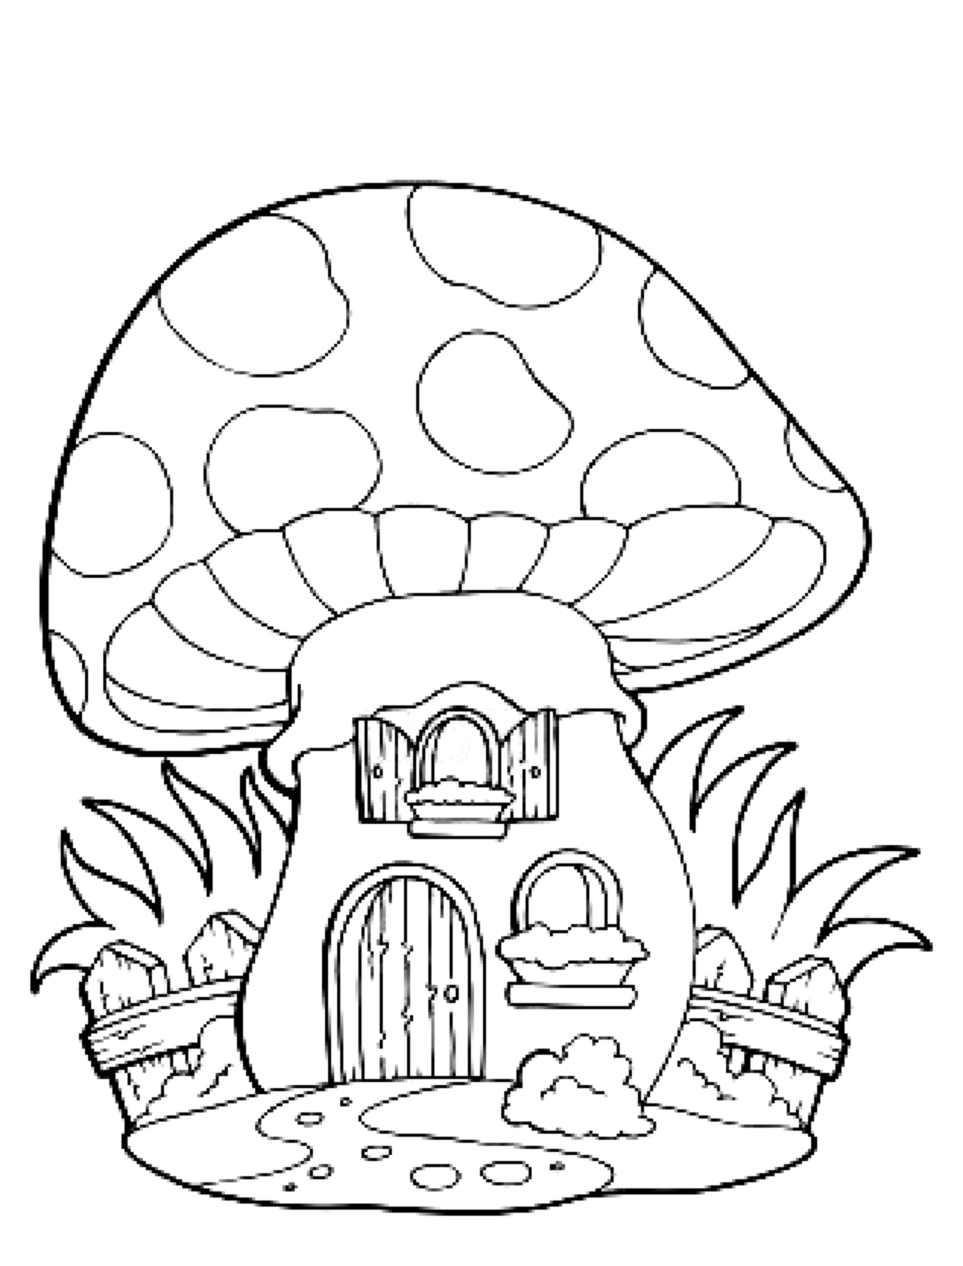 Mushrooms to color for children   Mushrooms Kids Coloring Pages